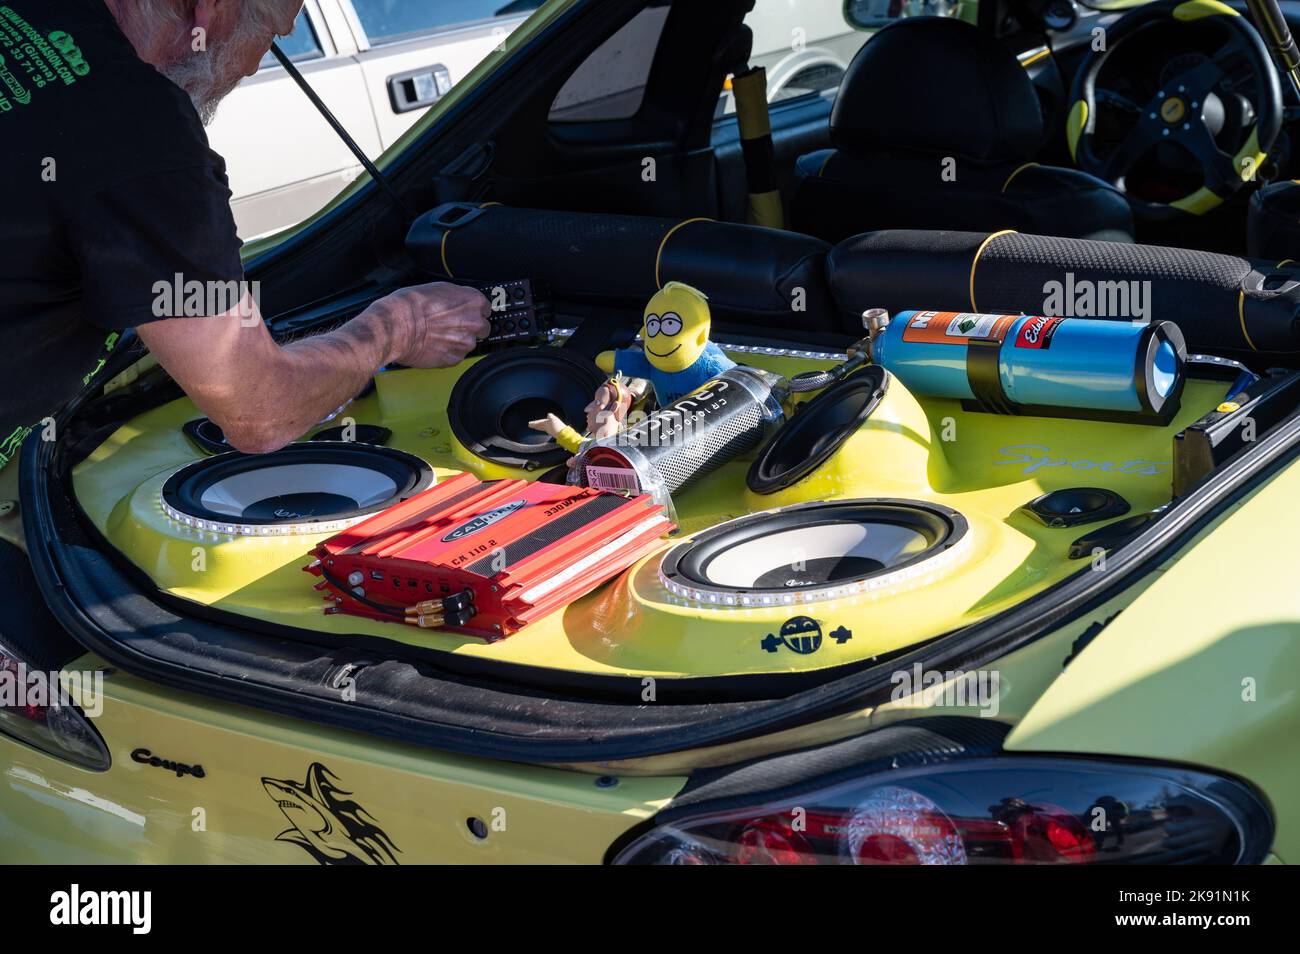 A man working on a tuned yellow Hyundai Coupe with stereo and toys in the trunk Stock Photo